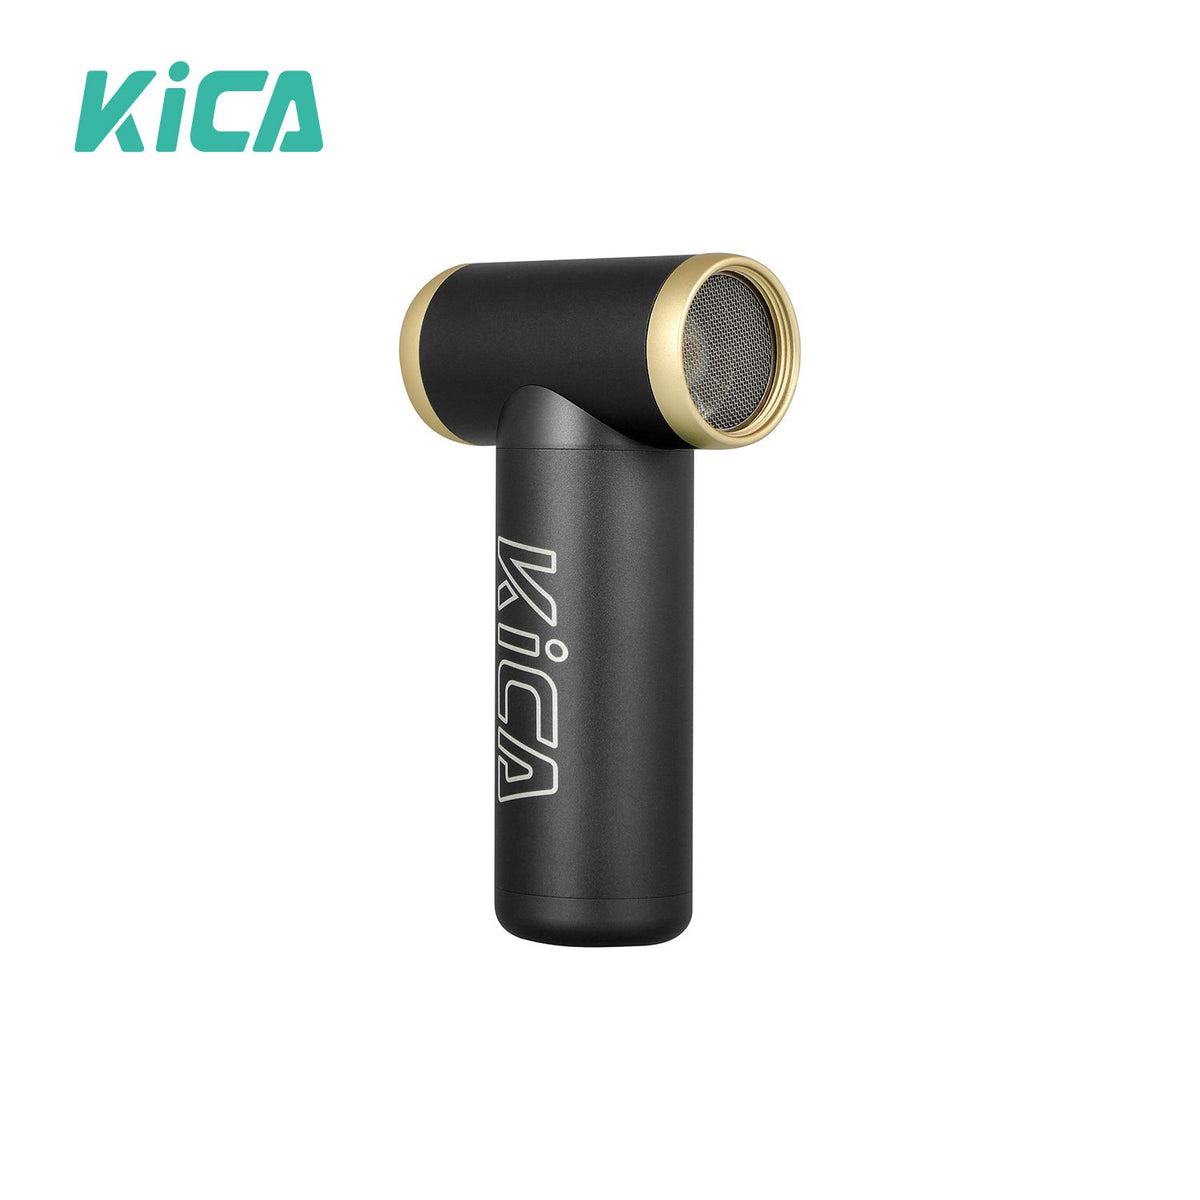 KiCA Jet Fan 2  Compact But Powerful Air Duster – KICA